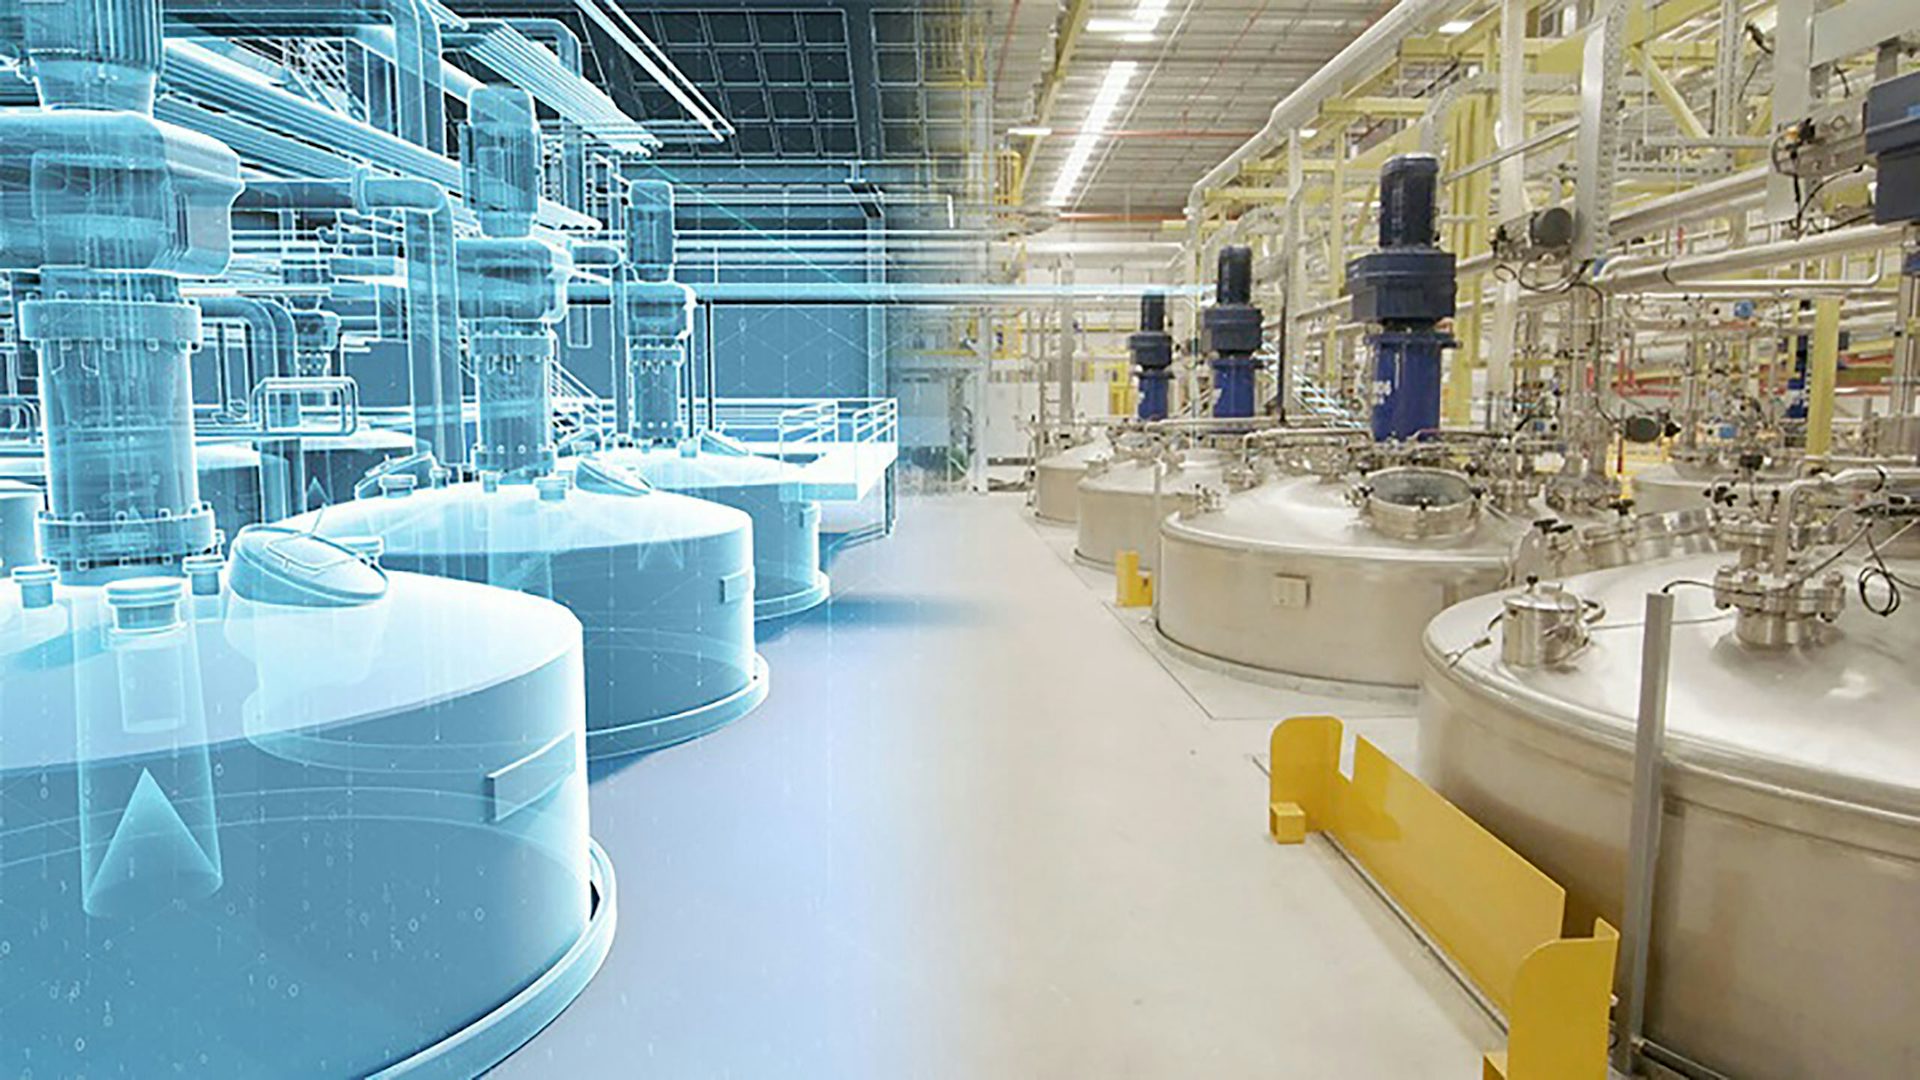  Digitial twin of a Manufacturing plant